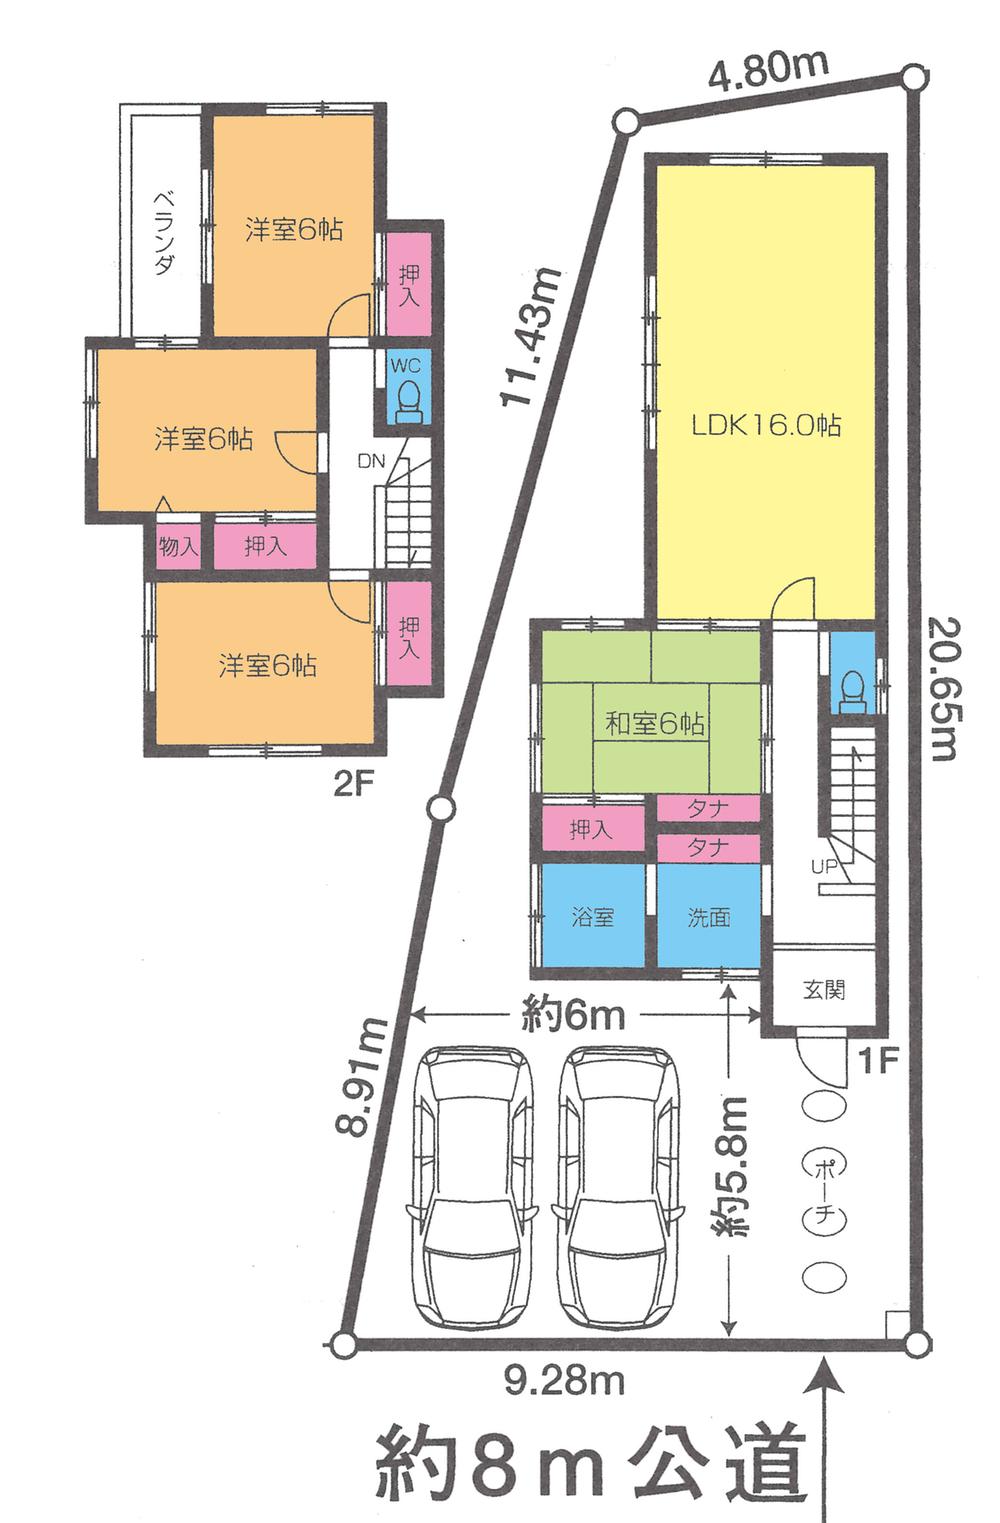 Other building plan example. Architecture Reference Plan Floor Plan